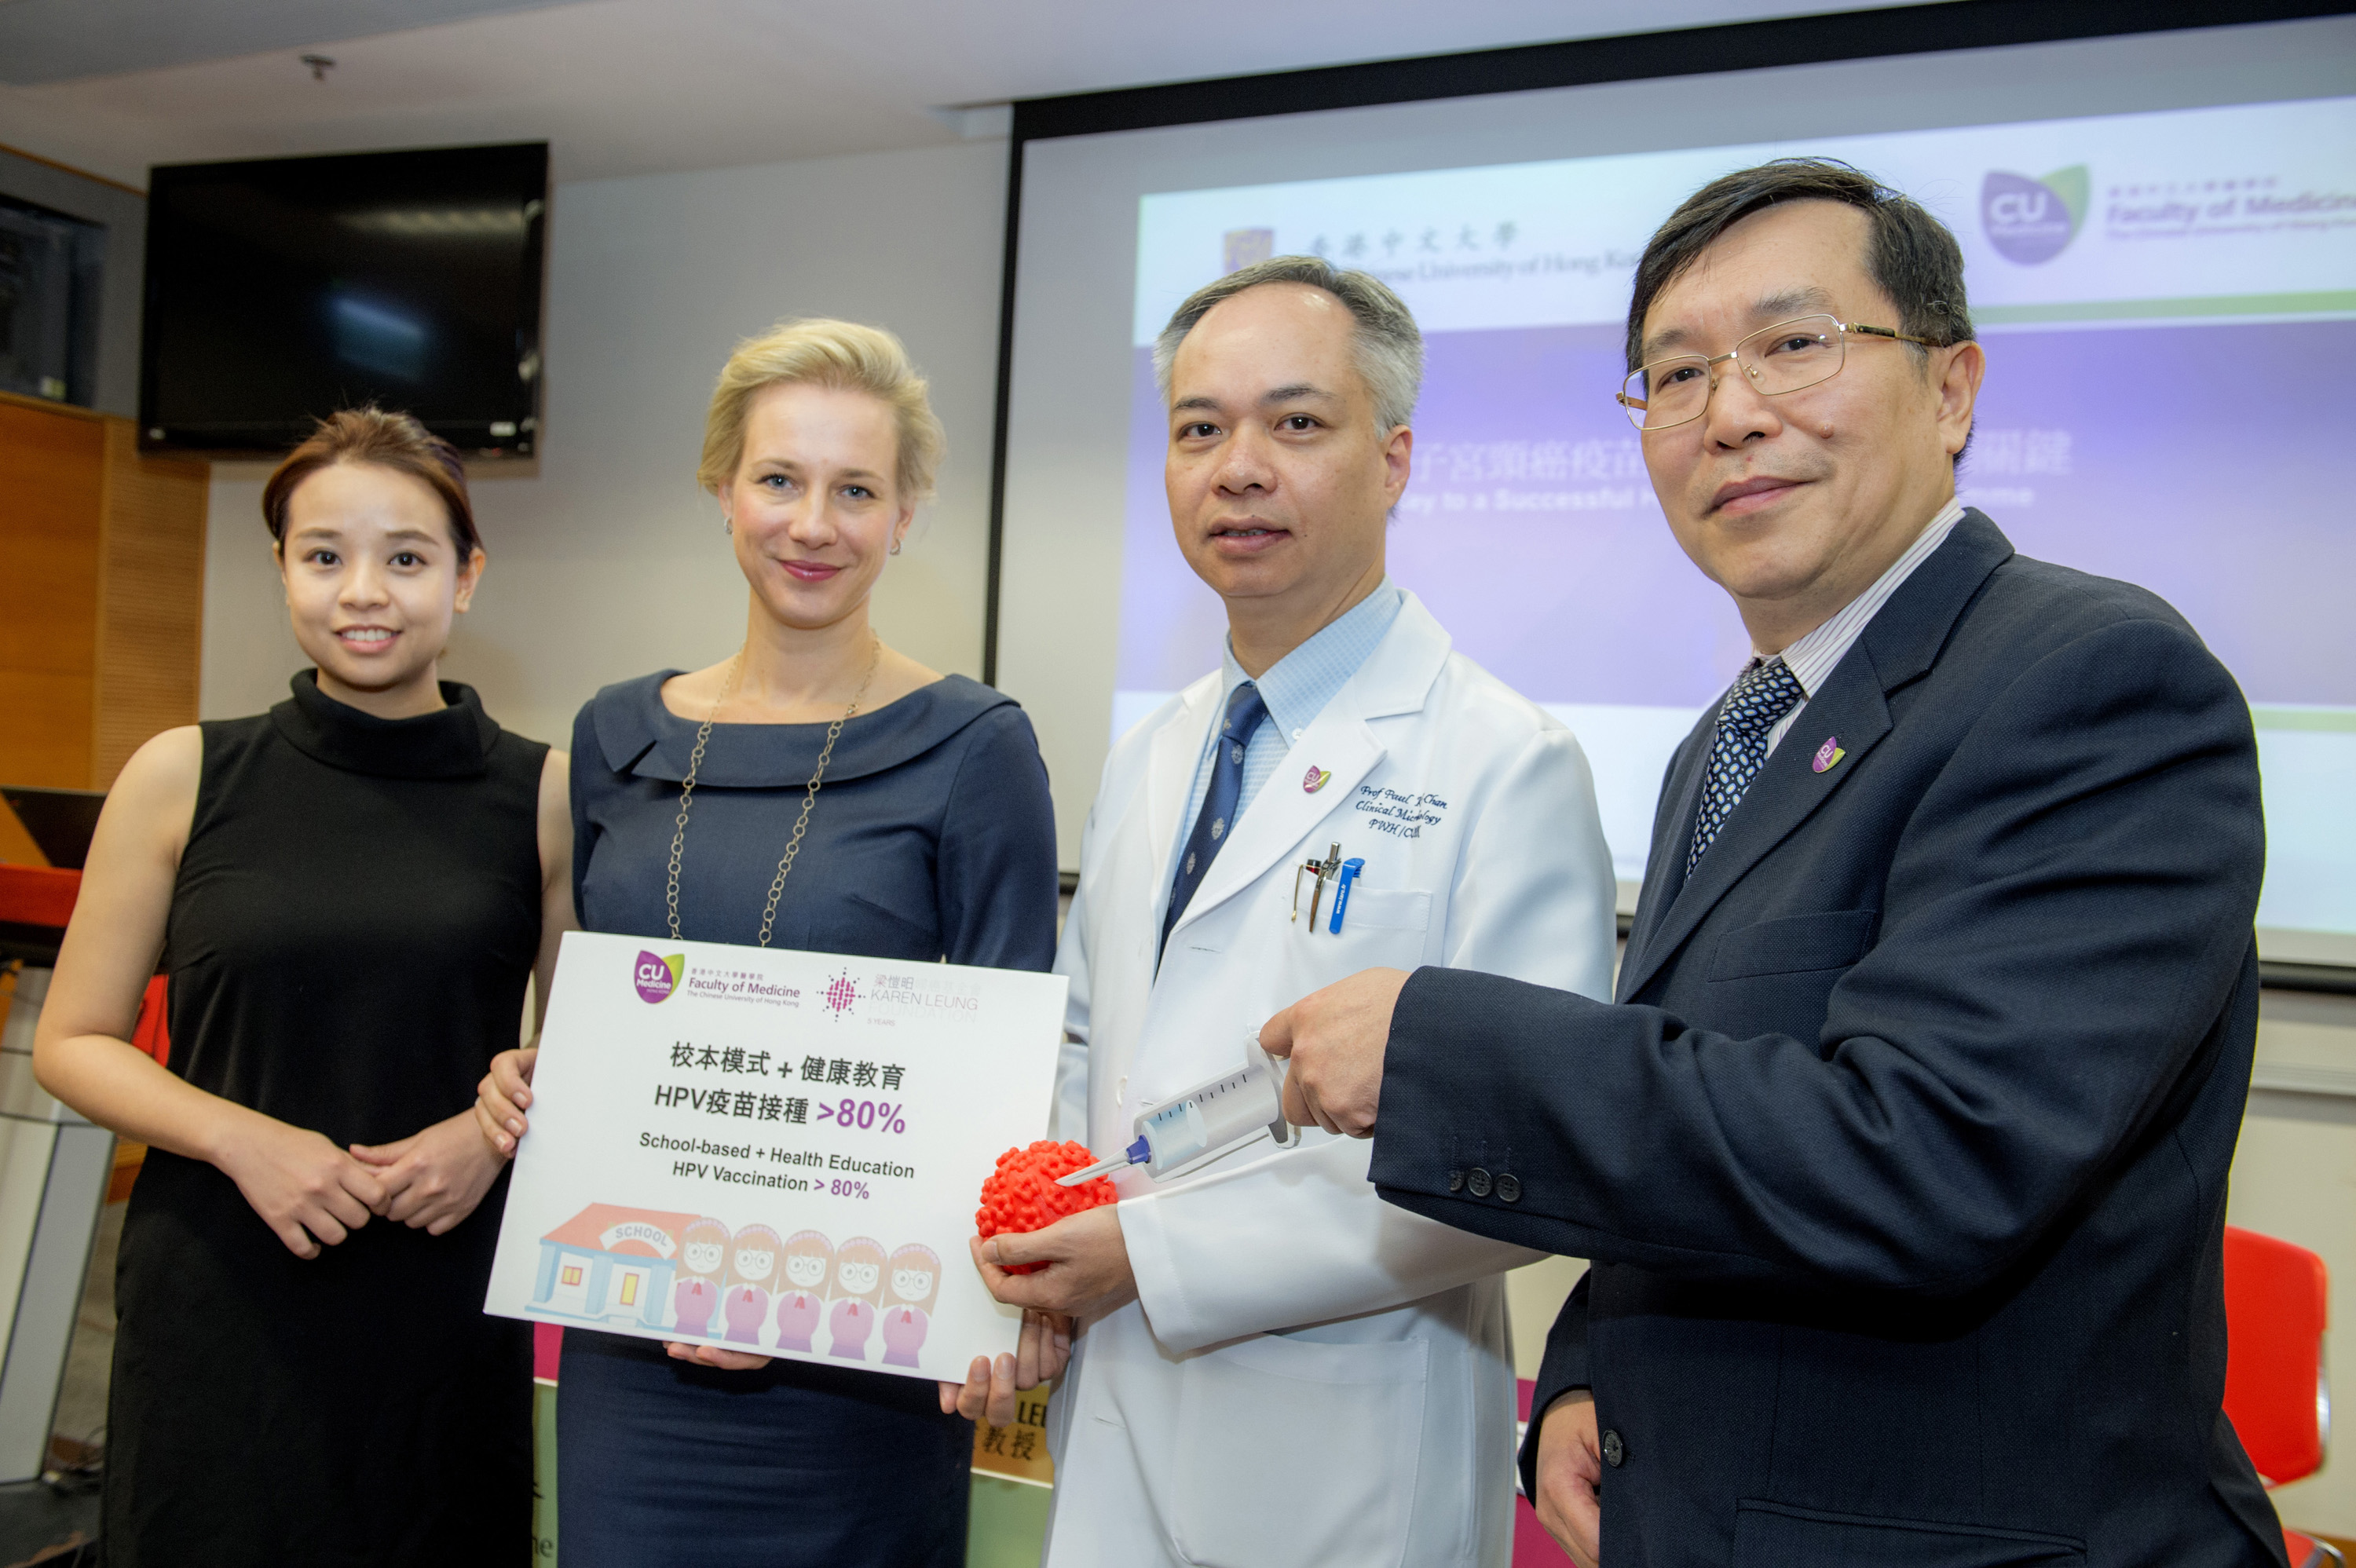 A collaborative study by the Faculty of Medicine at CUHK and the Karen Leung Foundation revealed that a school-based HPV vaccination model, accompanied by information aimed at parents and girls, can achieve a high uptake rate of over 80%. (From right: Professor Albert LEE, Director of the Centre for Health Education and Health Promotion at The Jockey Club School of Public Health and Primary Care and Professor Paul Kay Sheung CHAN, Chairman of the Department of Microbiology from the Faculty of Medicine at CUHK; Ms. Katharina REIMER, Executive Director and Ms. Sunny YANG, Healthcare Program Manager from the Karen Leung Foundation)